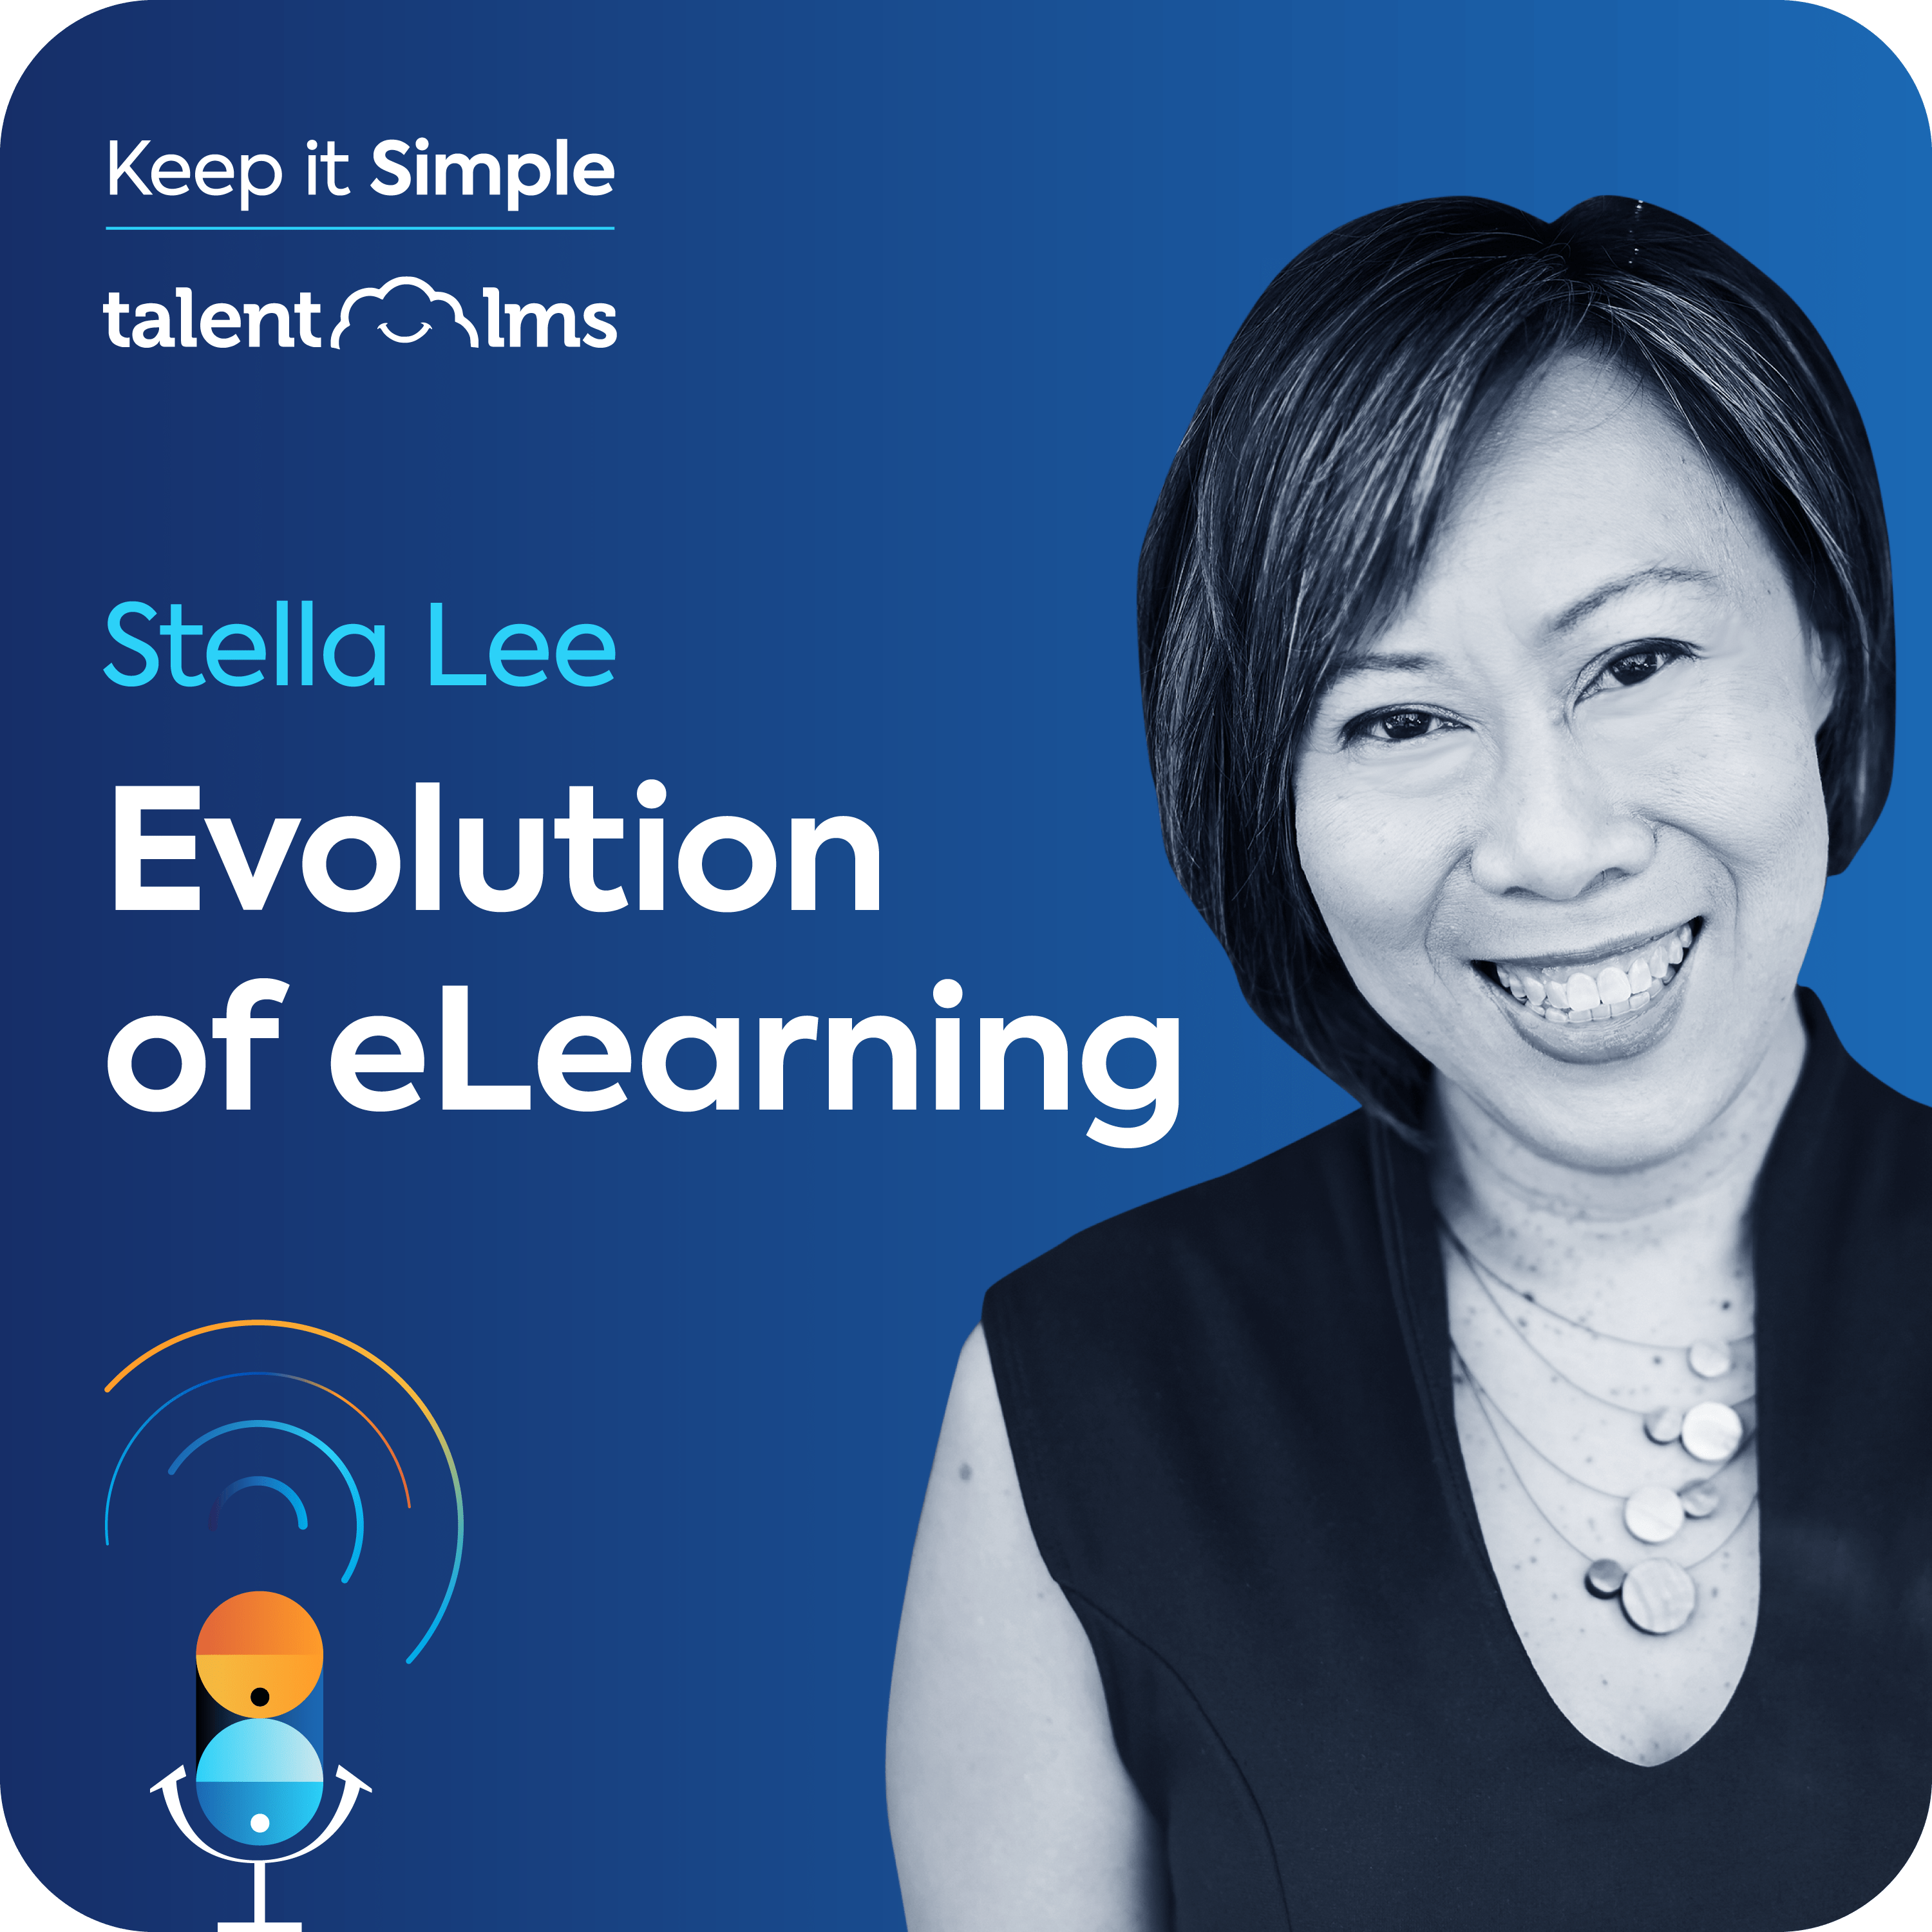 Stella Lee sits on a blue background, with the Keep it Simple logo and the TalentLMS logo in the top left corner along with the name of the episode "Evolution of eLearning".